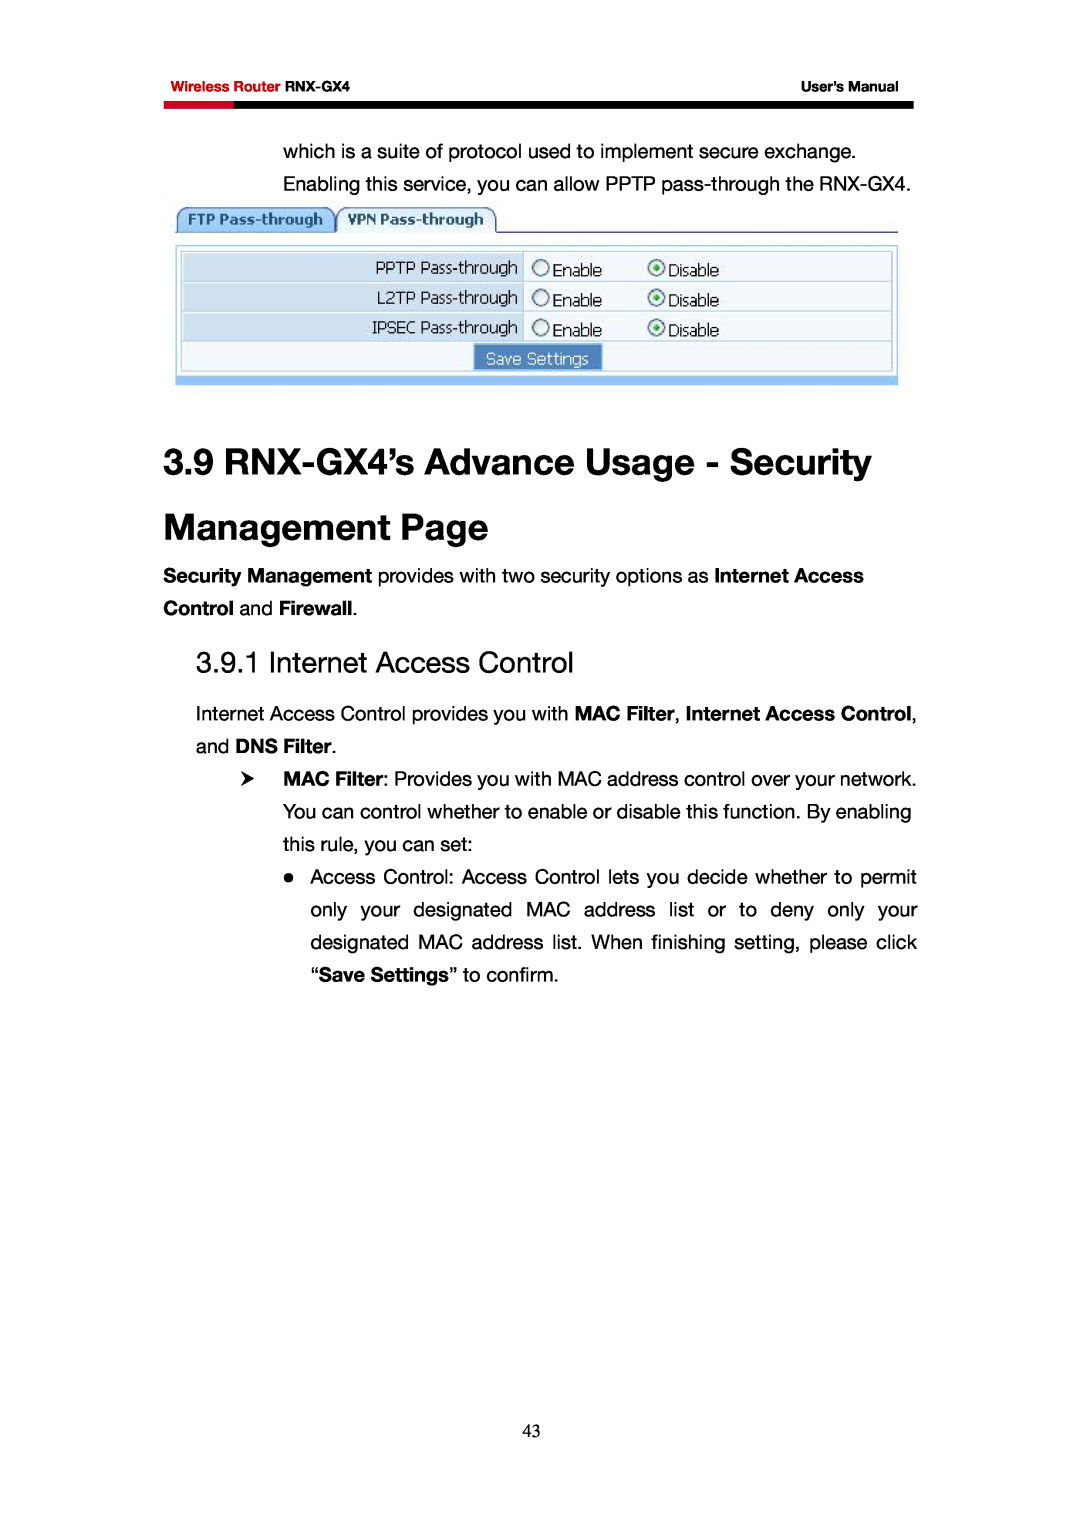 Rosewill user manual RNX-GX4’s Advance Usage - Security Management Page, Internet Access Control, Control and Firewall 